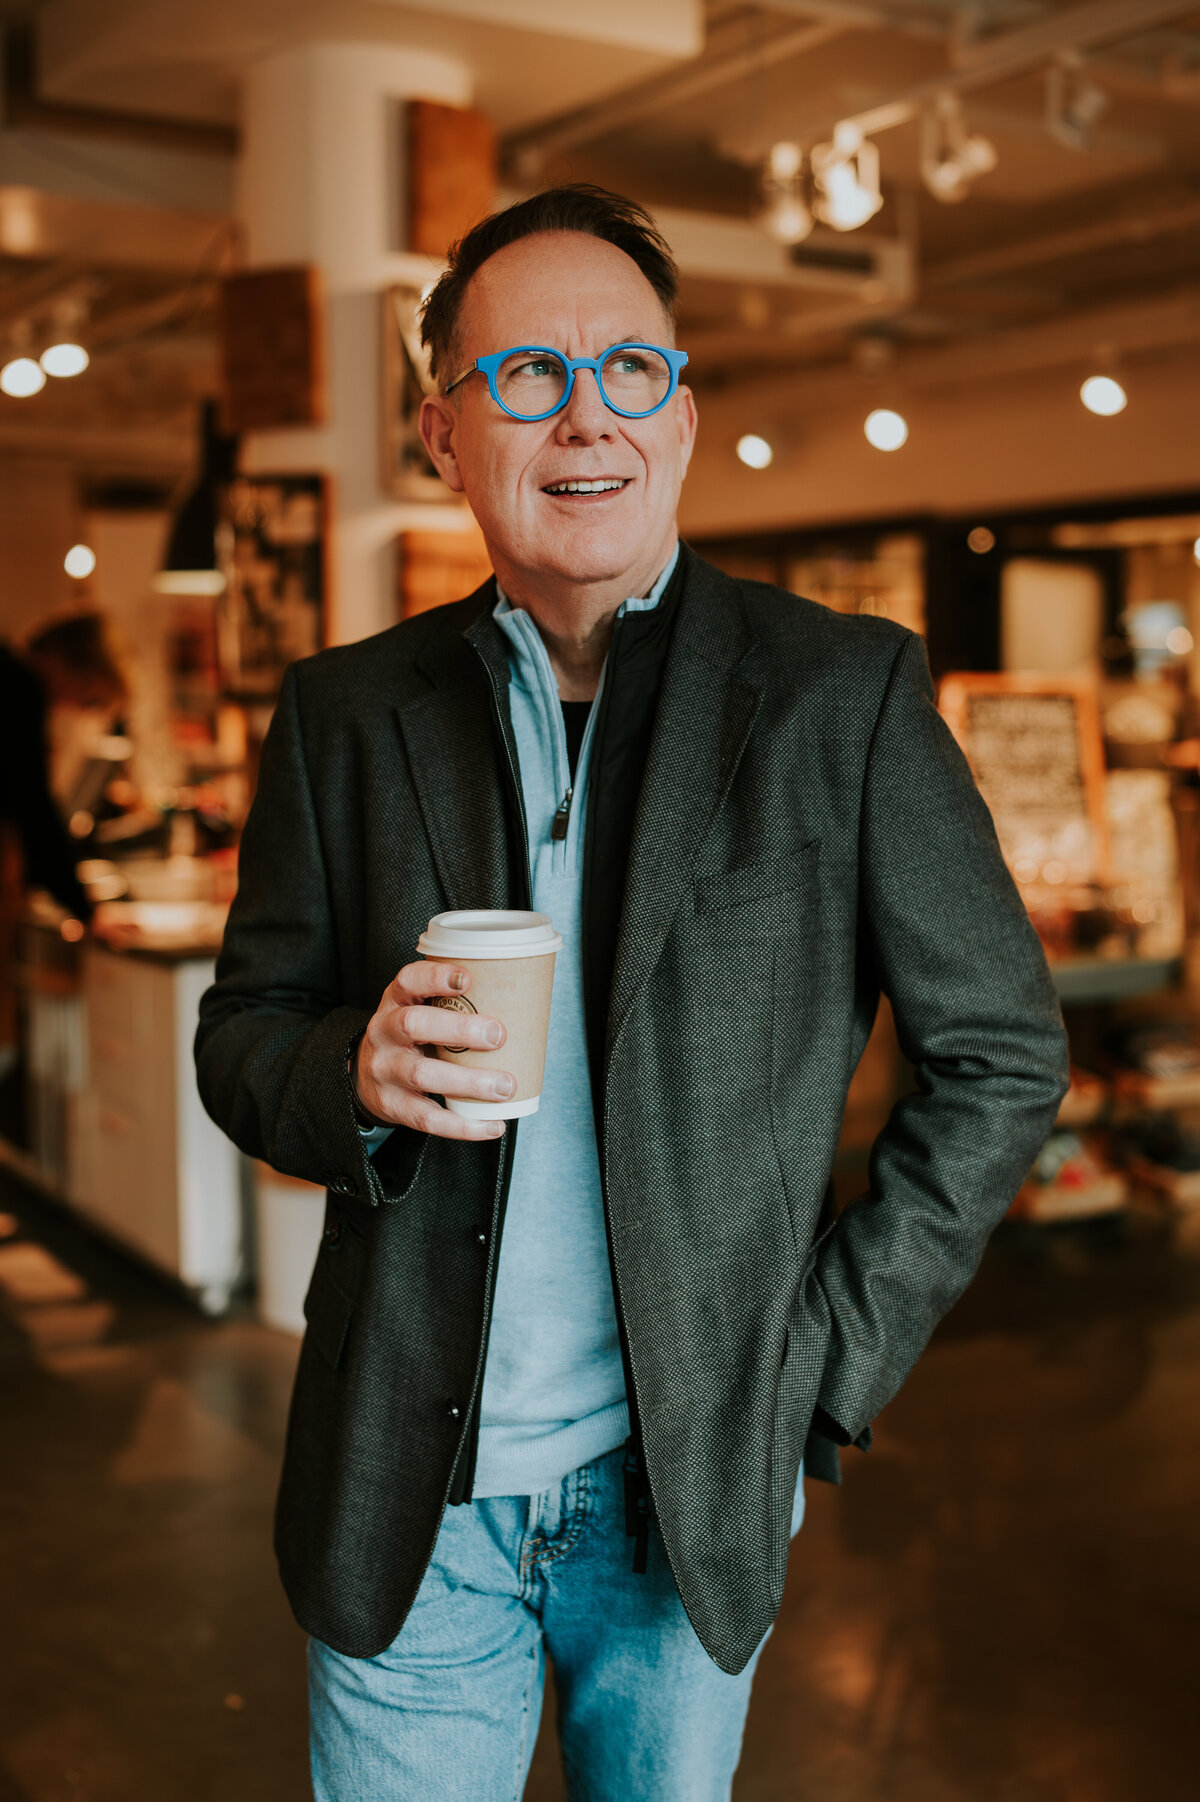 Elevate your dating profile with sophisticated portraits of a Minneapolis businessman captured at the stylish Cooks and Crocus in North Loop. Make a lasting impression online with images that exude professionalism and charm